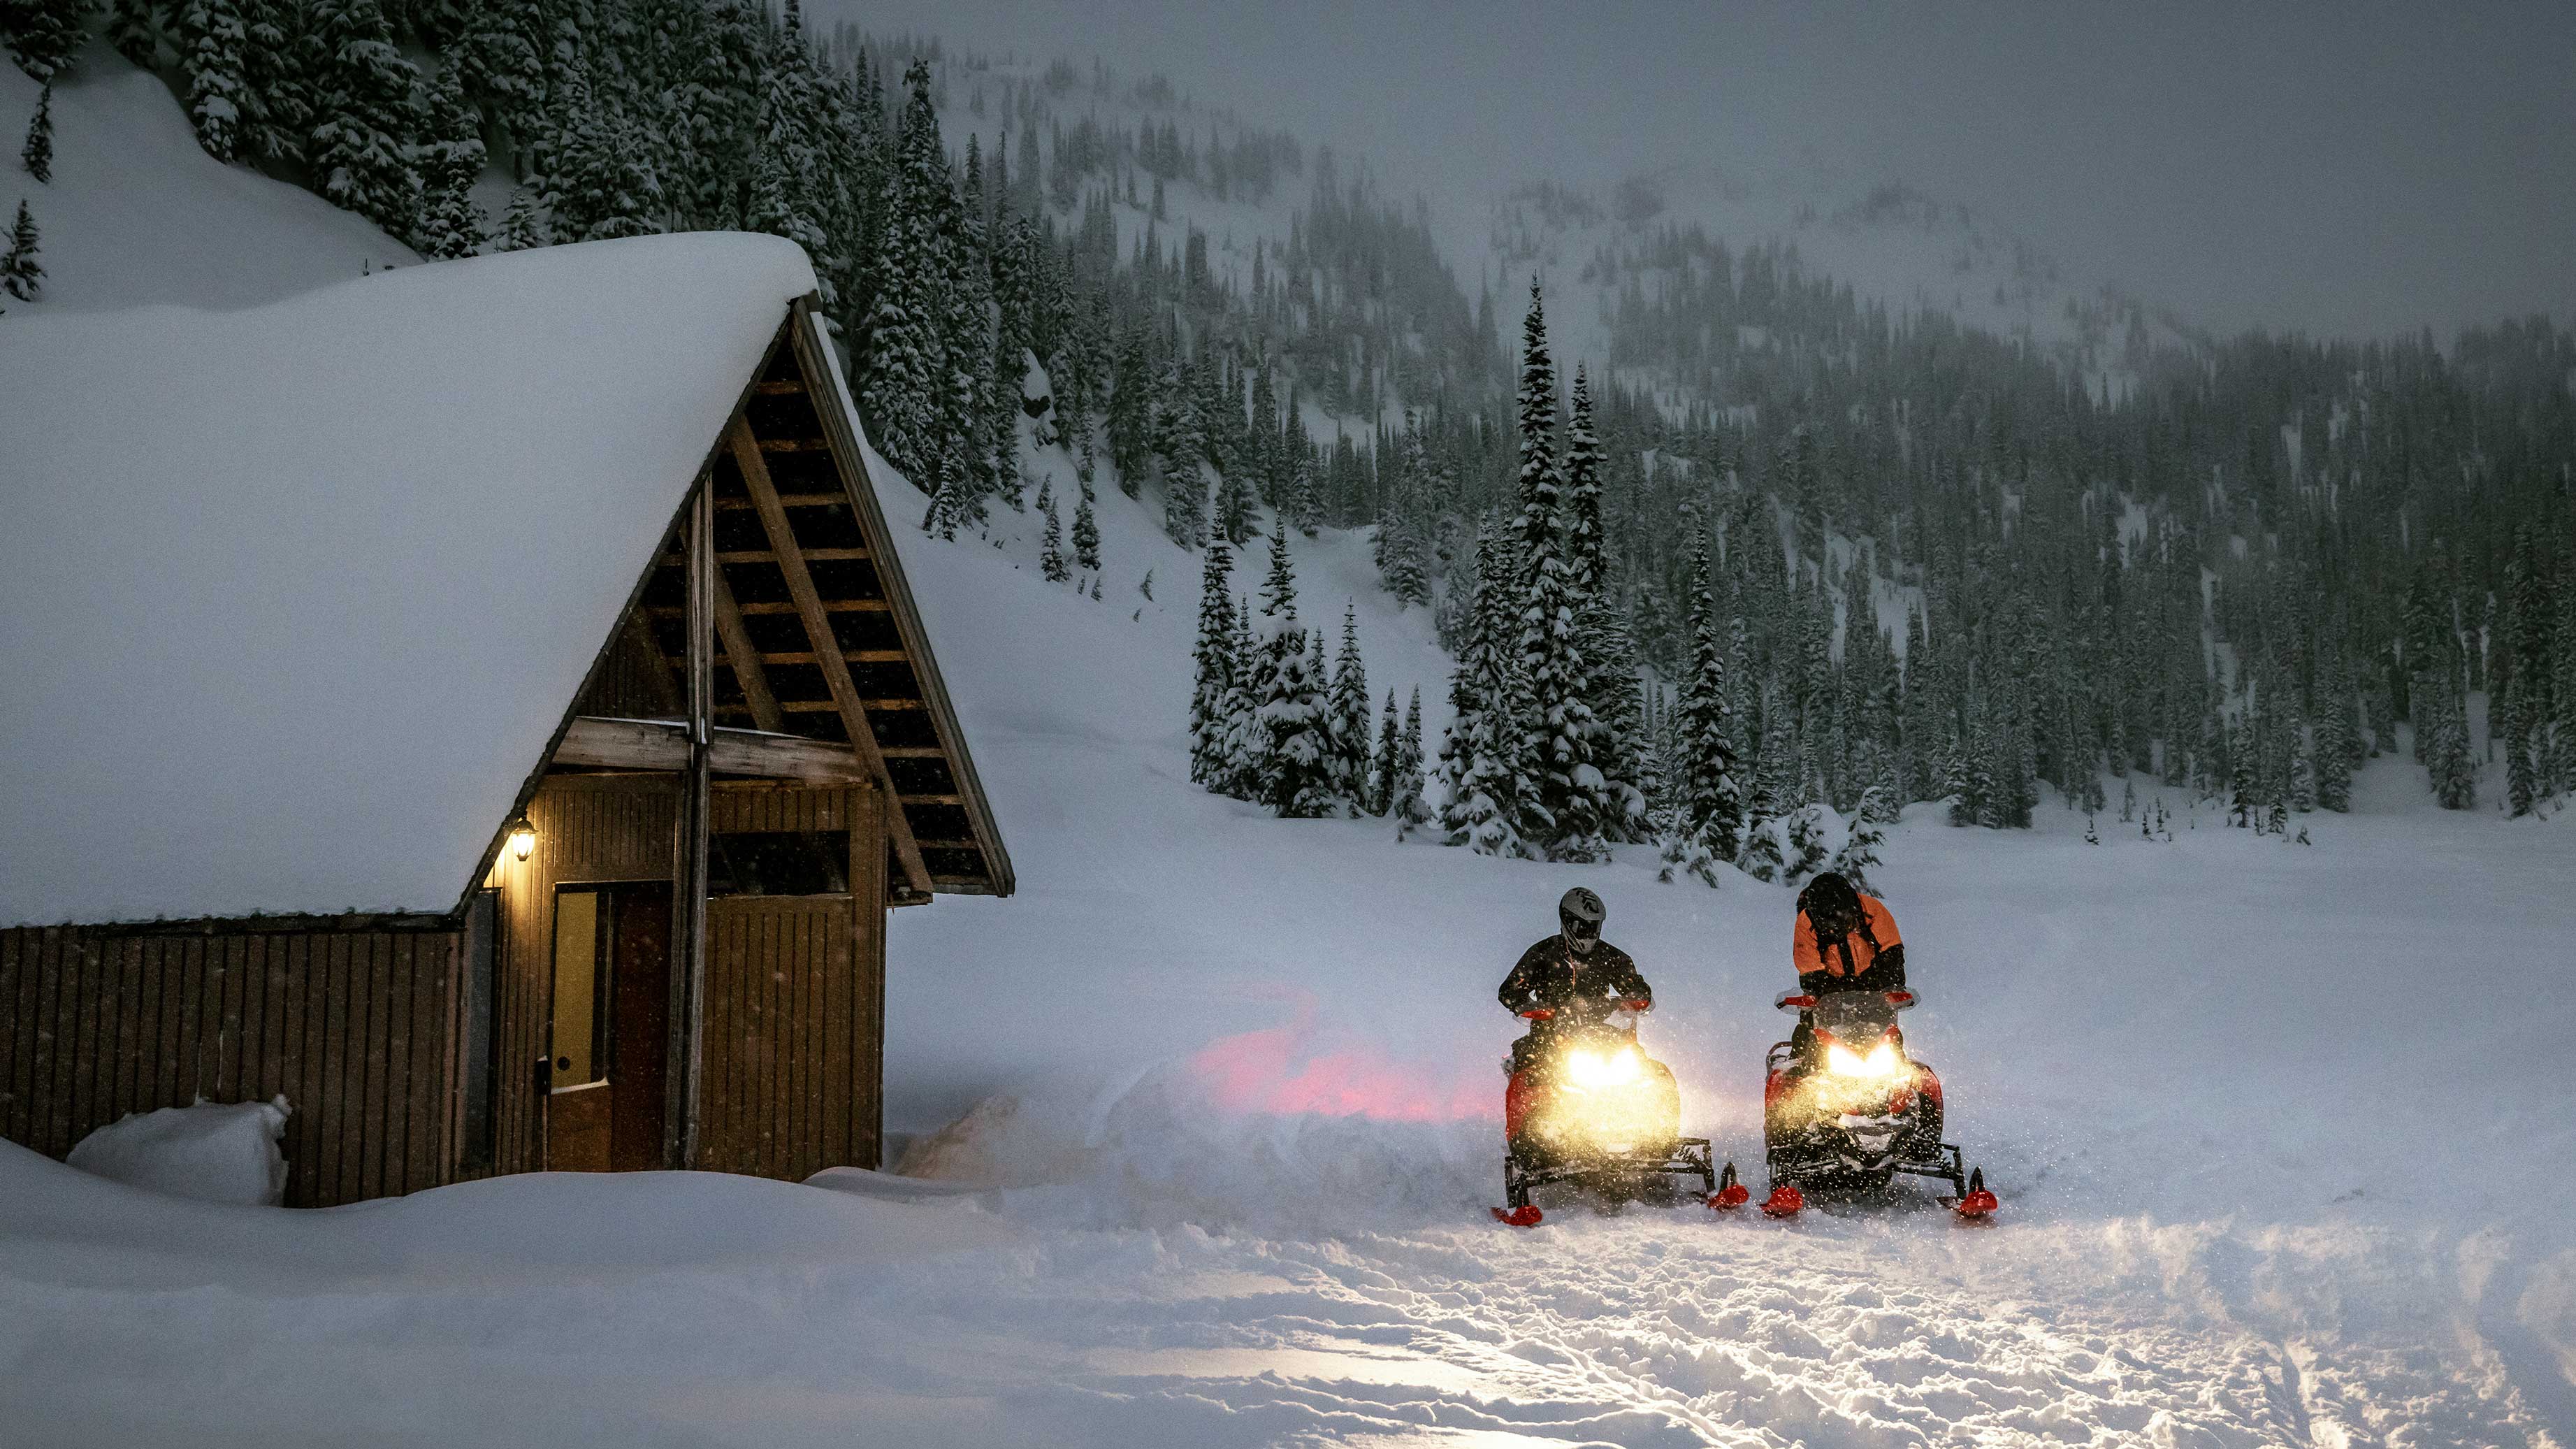 Two Lynx snowmobile riders arriving at a lodge